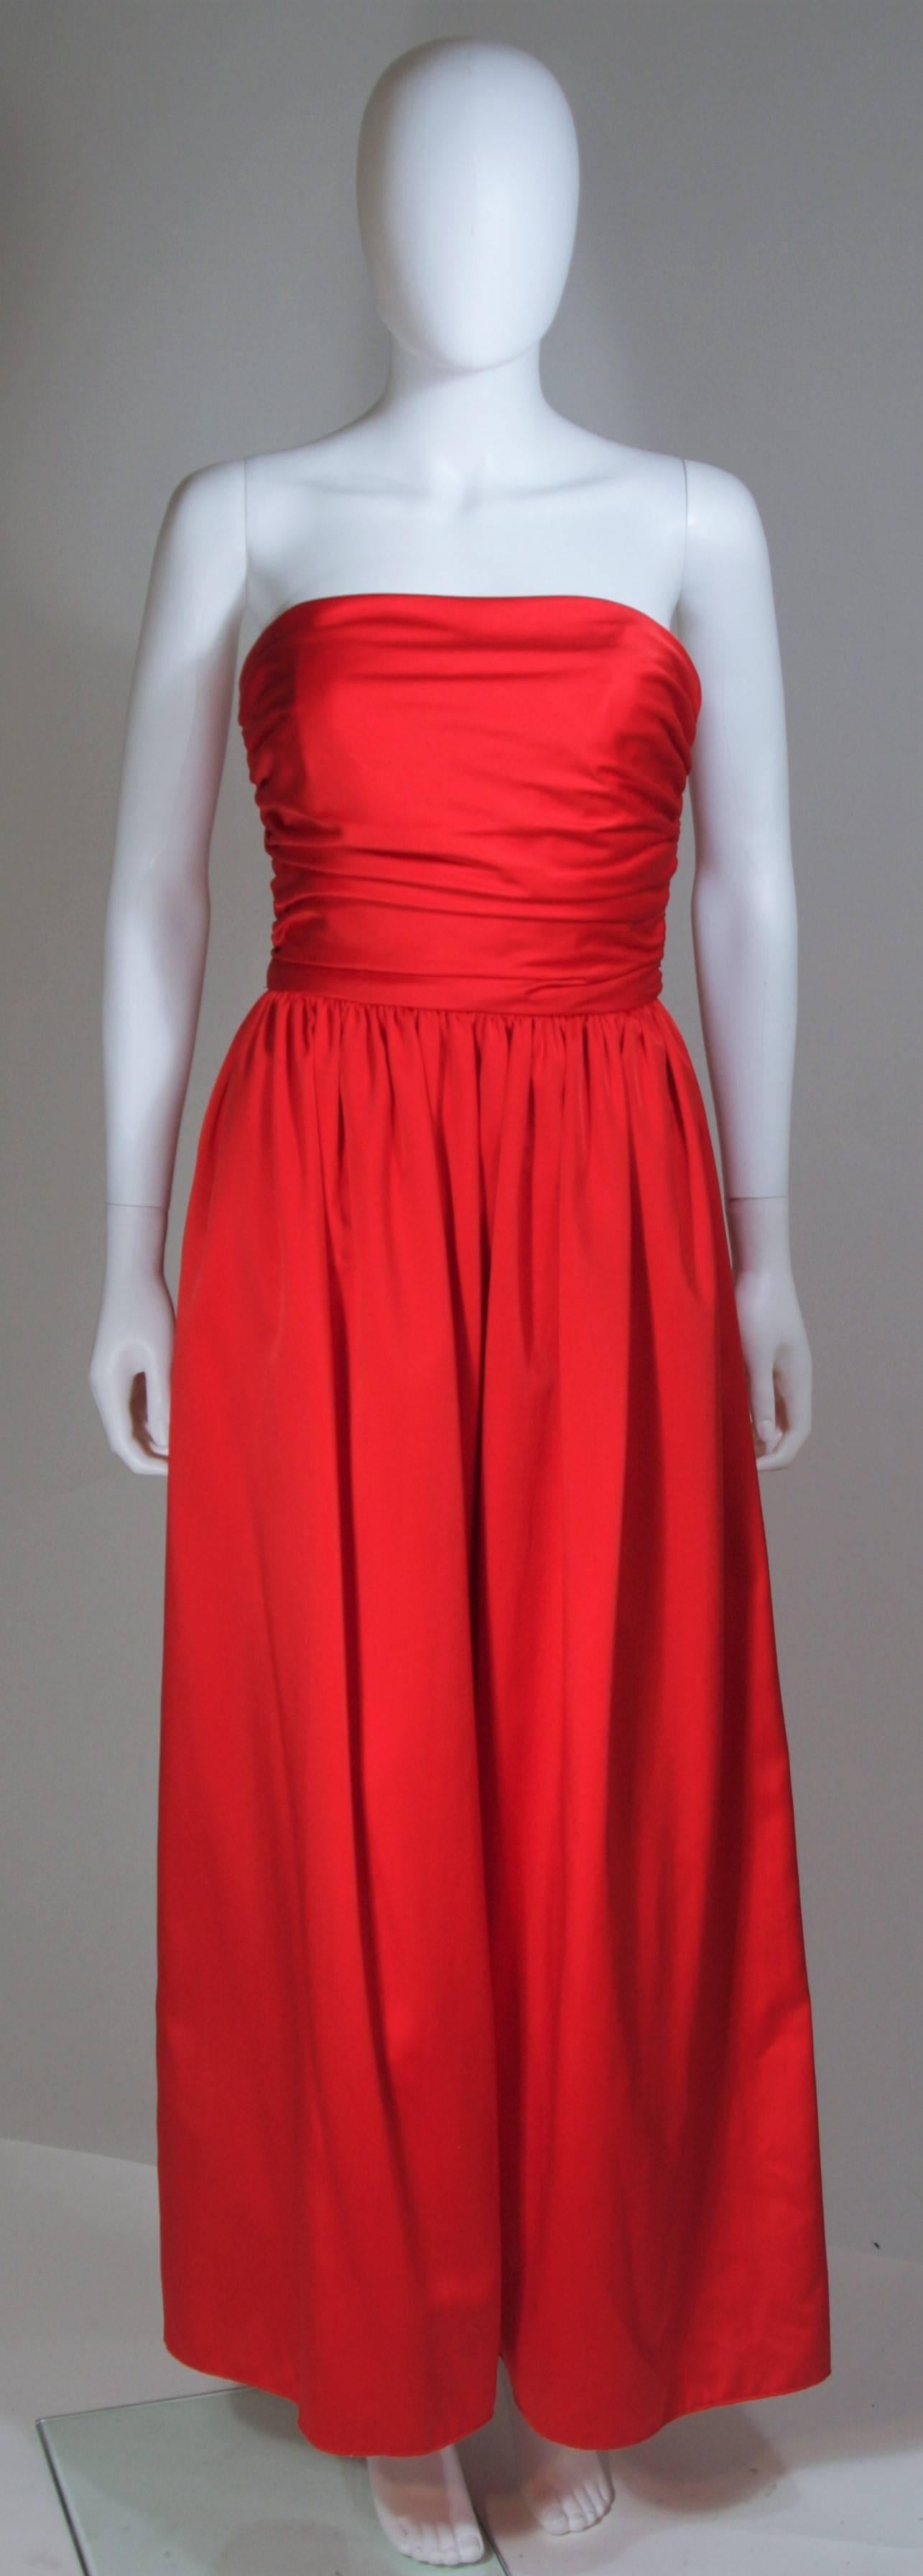  This Anthony Muto gown is composed of a red silk with gathered bodice and full skirt. Features a tie at the waist and center back zipper. In excellent vintage condition. 

**Please cross-reference measurements for personal accuracy. Size in